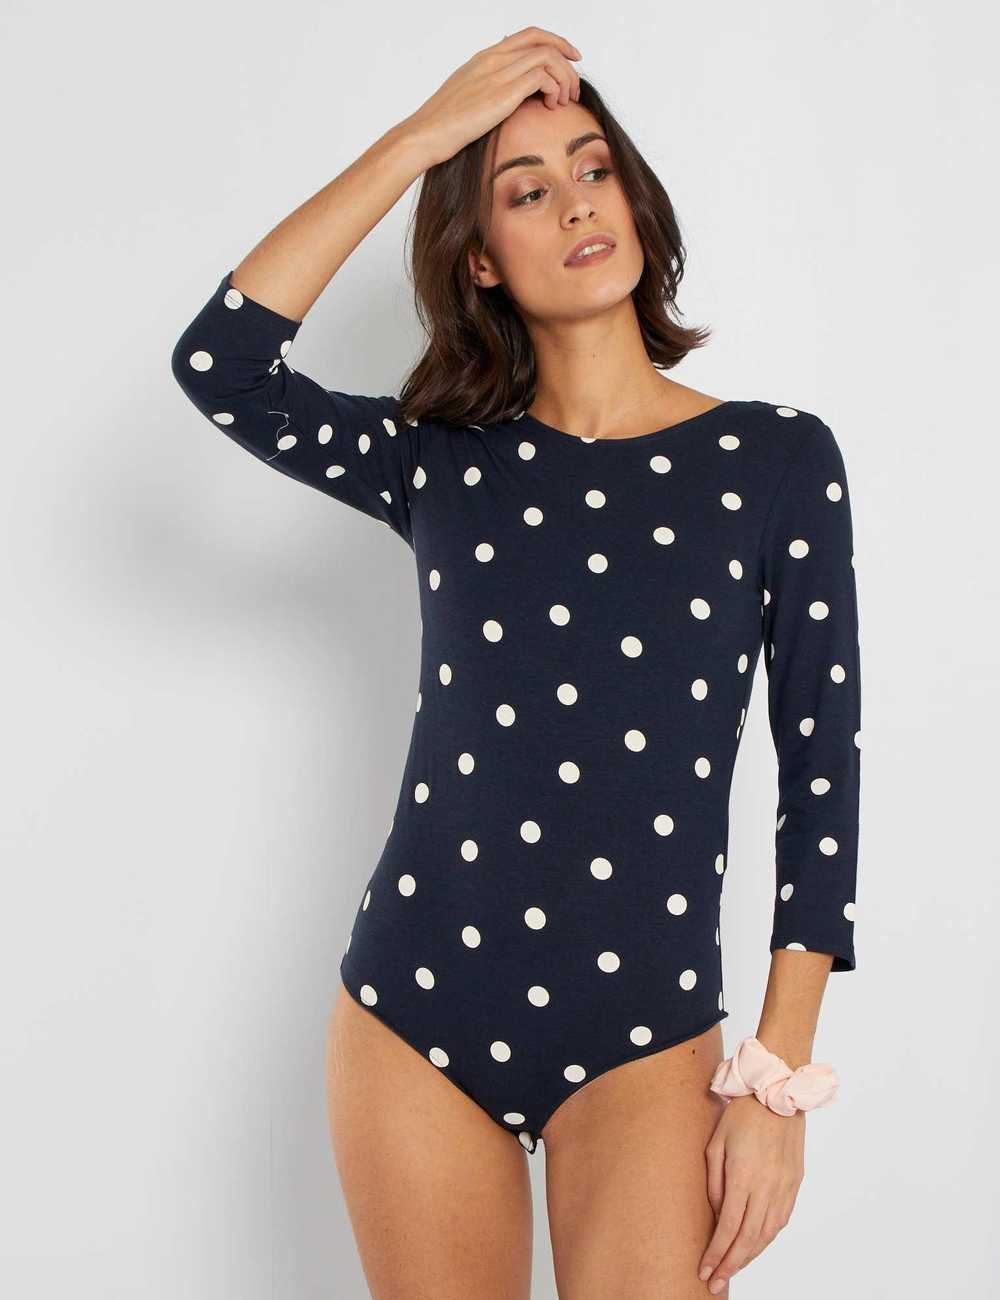 03 white with black polka dots long sleeve bathing suit with